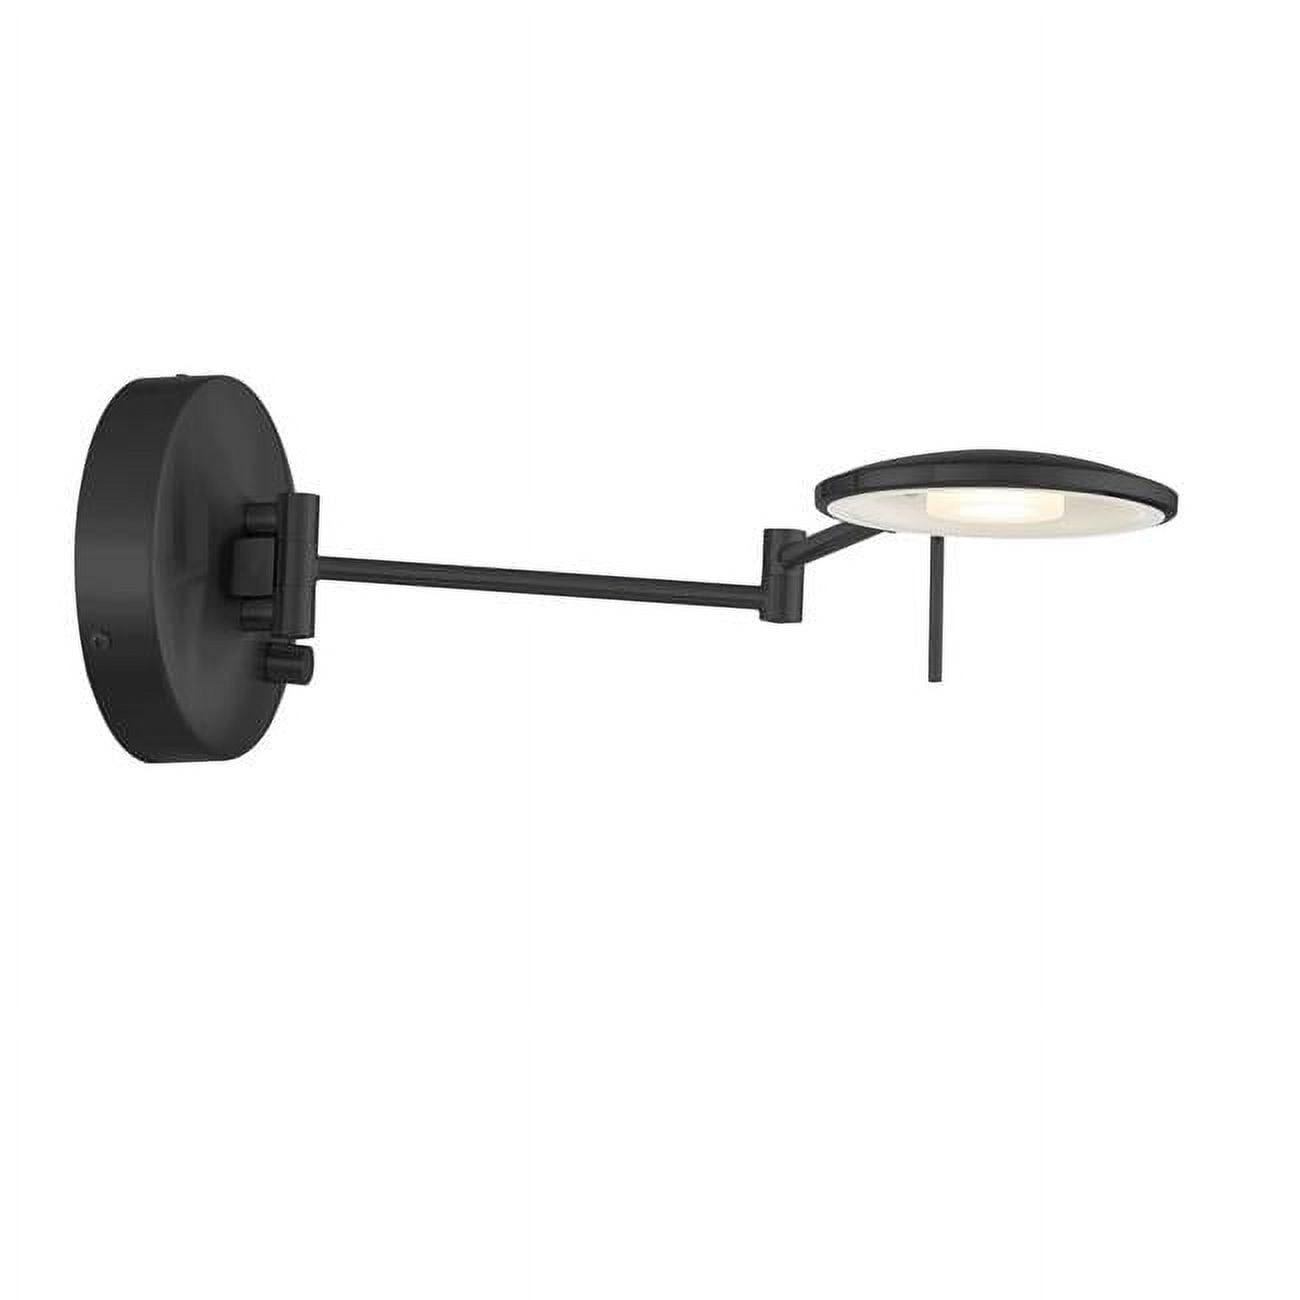 Picture of Arnsberg 225870135 Dessau Turbo Wall Sconce, Museum Black